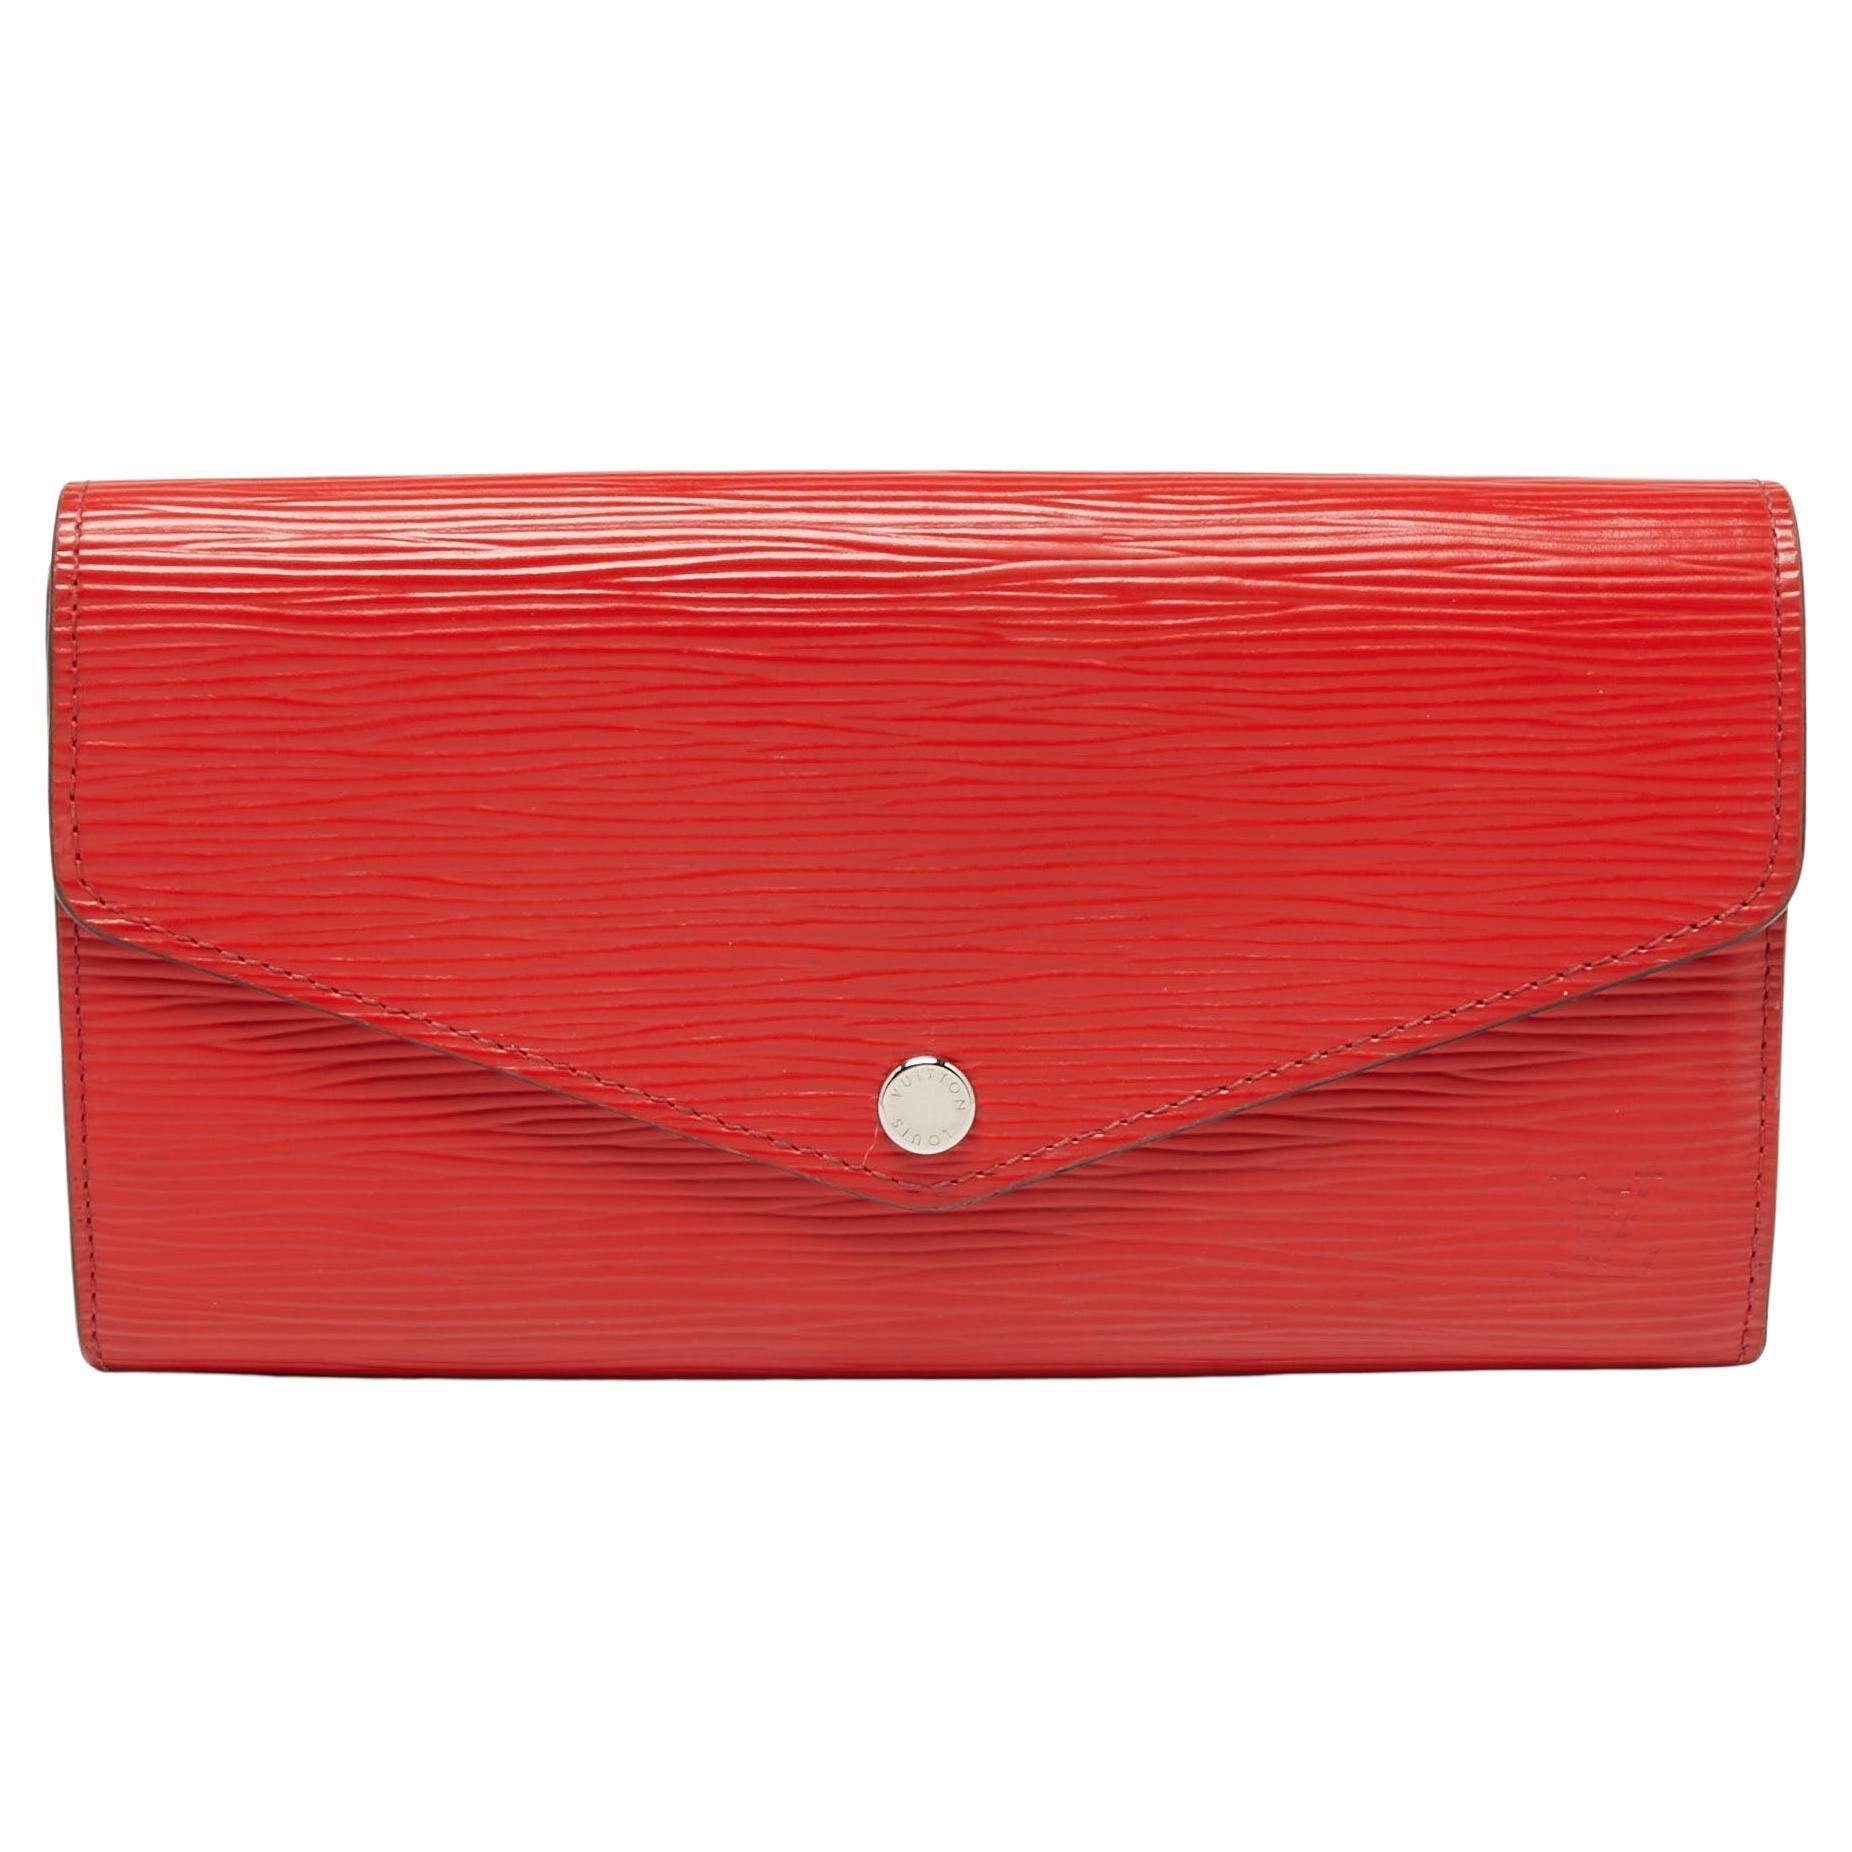 Sold at Auction: LOUIS VUITTON CARD HOLDER 3 SLOTS IN RED EPI LEATHER